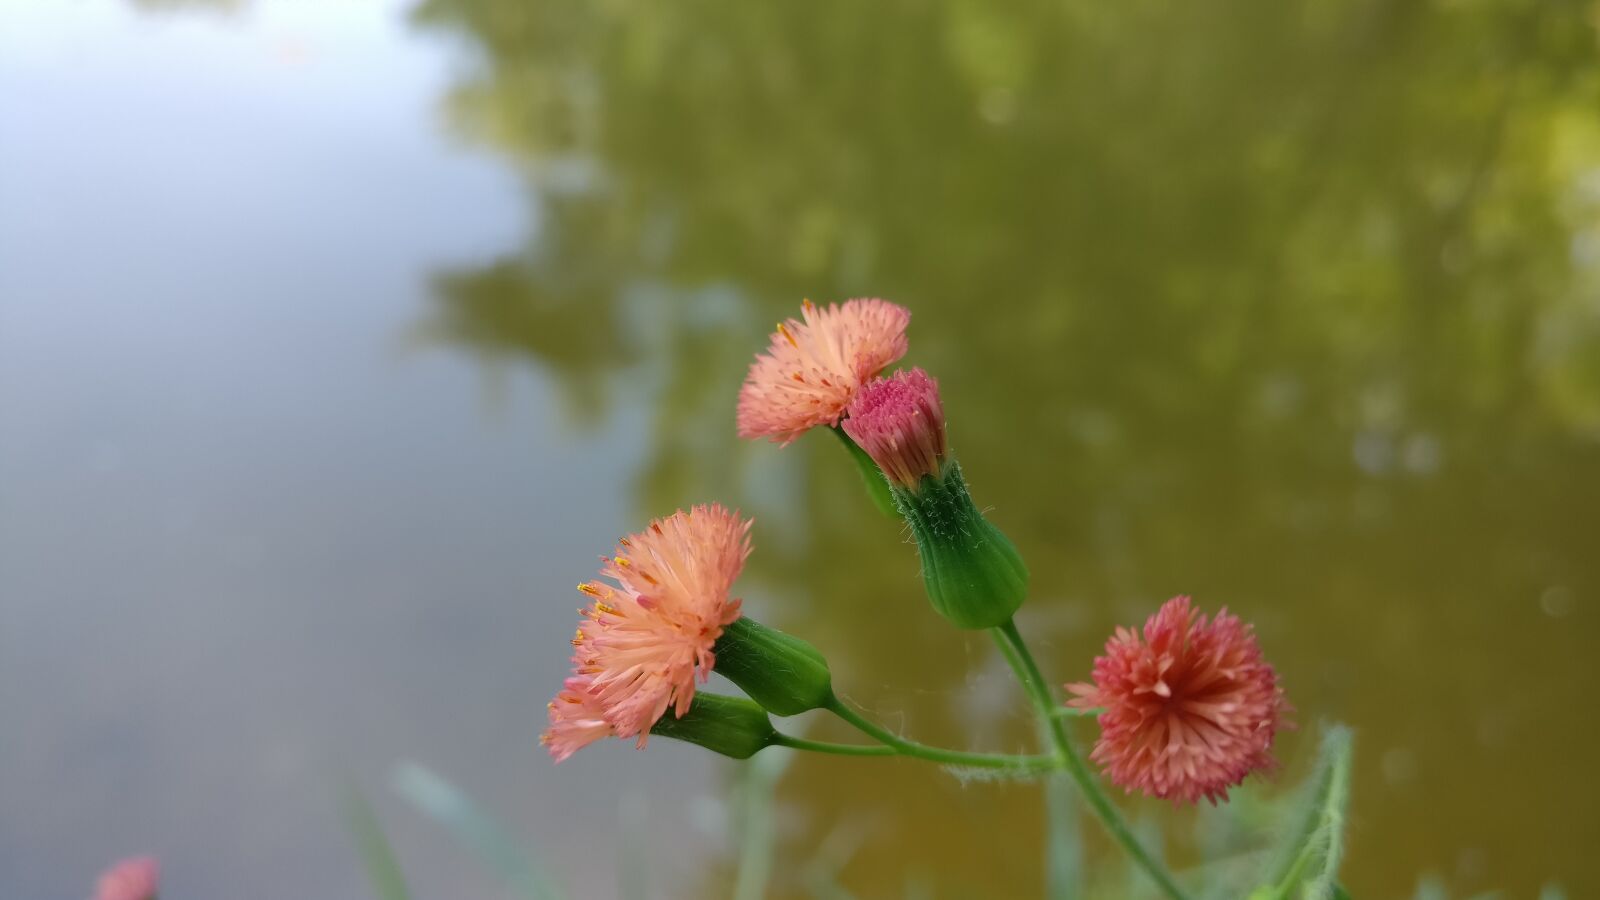 OnePlus A3010 sample photo. Flowers, beauty, water photography